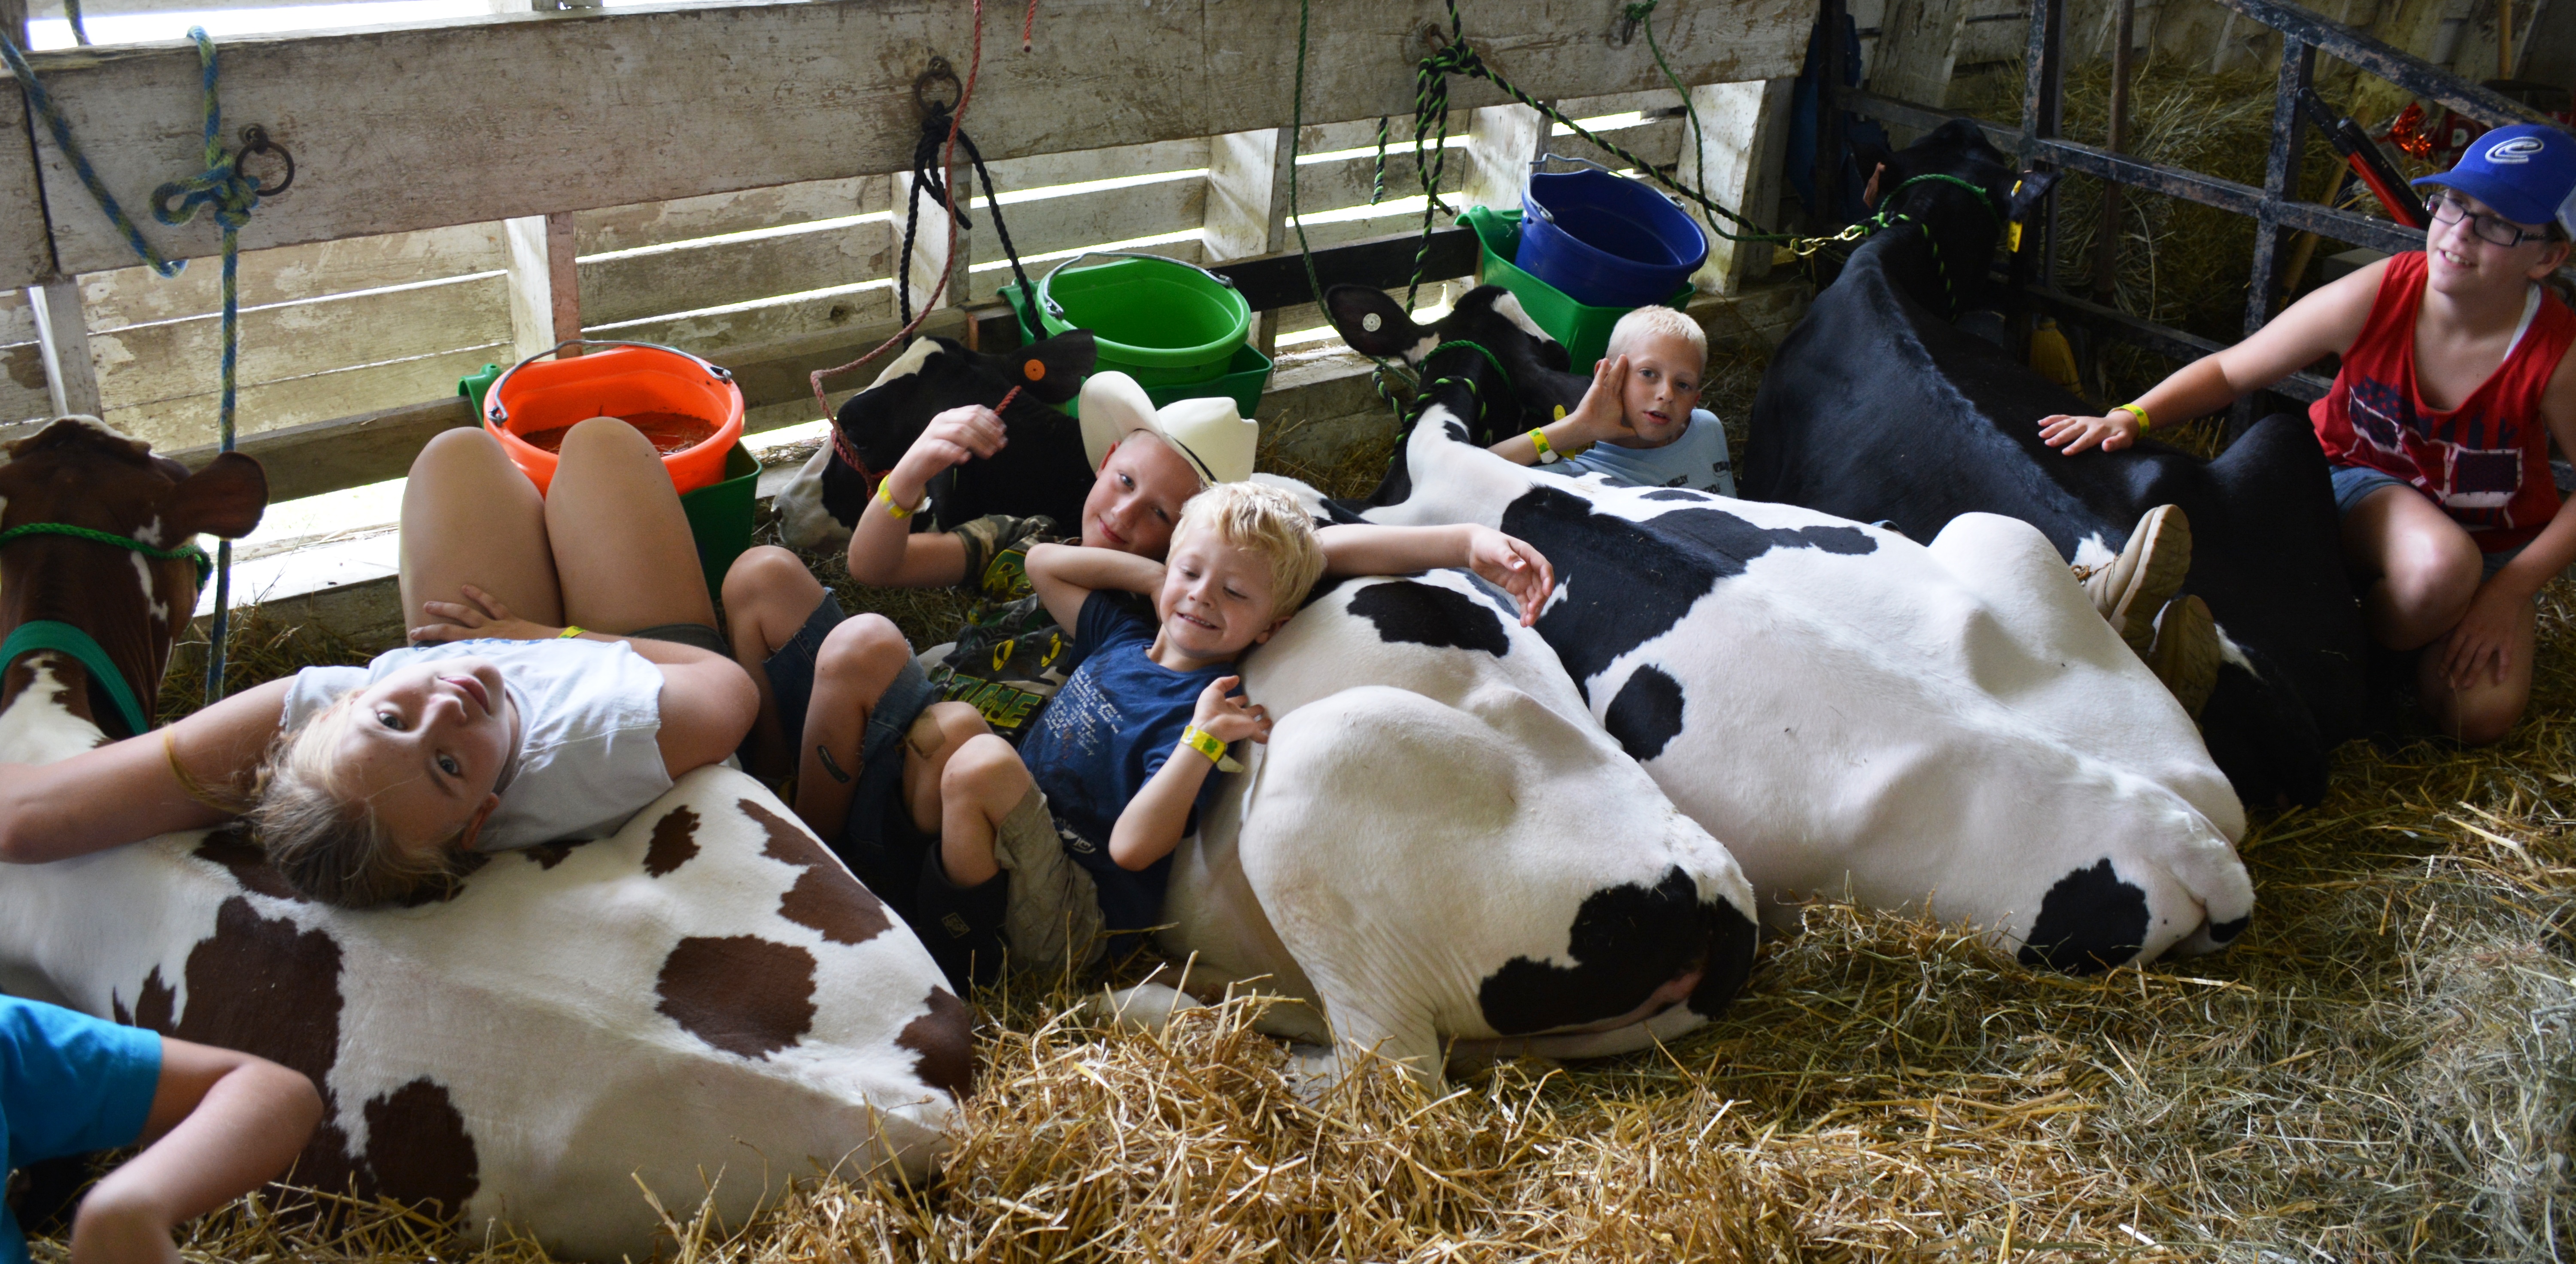 Activities and animals abound during Kids’ Days at the Tioga County Fair!